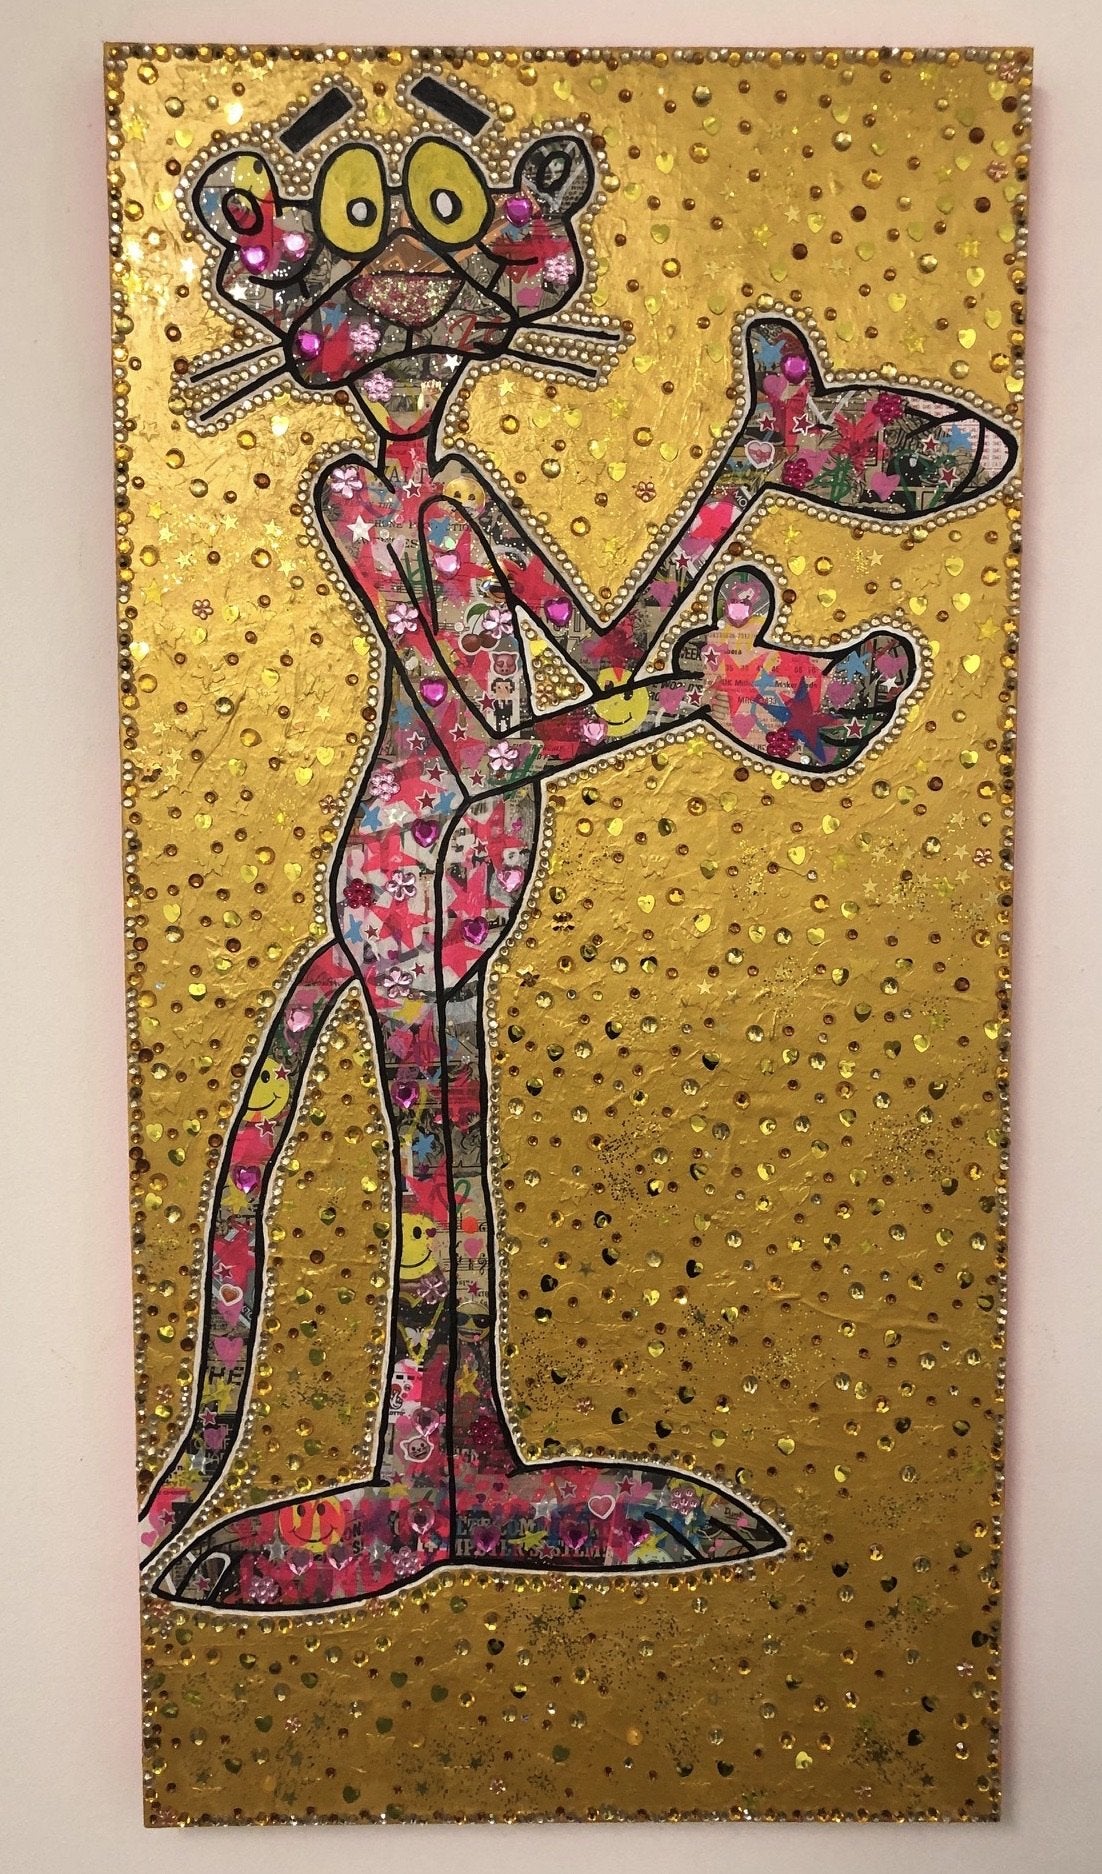 In the pink Painting - BARRIE J DAVIES IS AN ARTIST